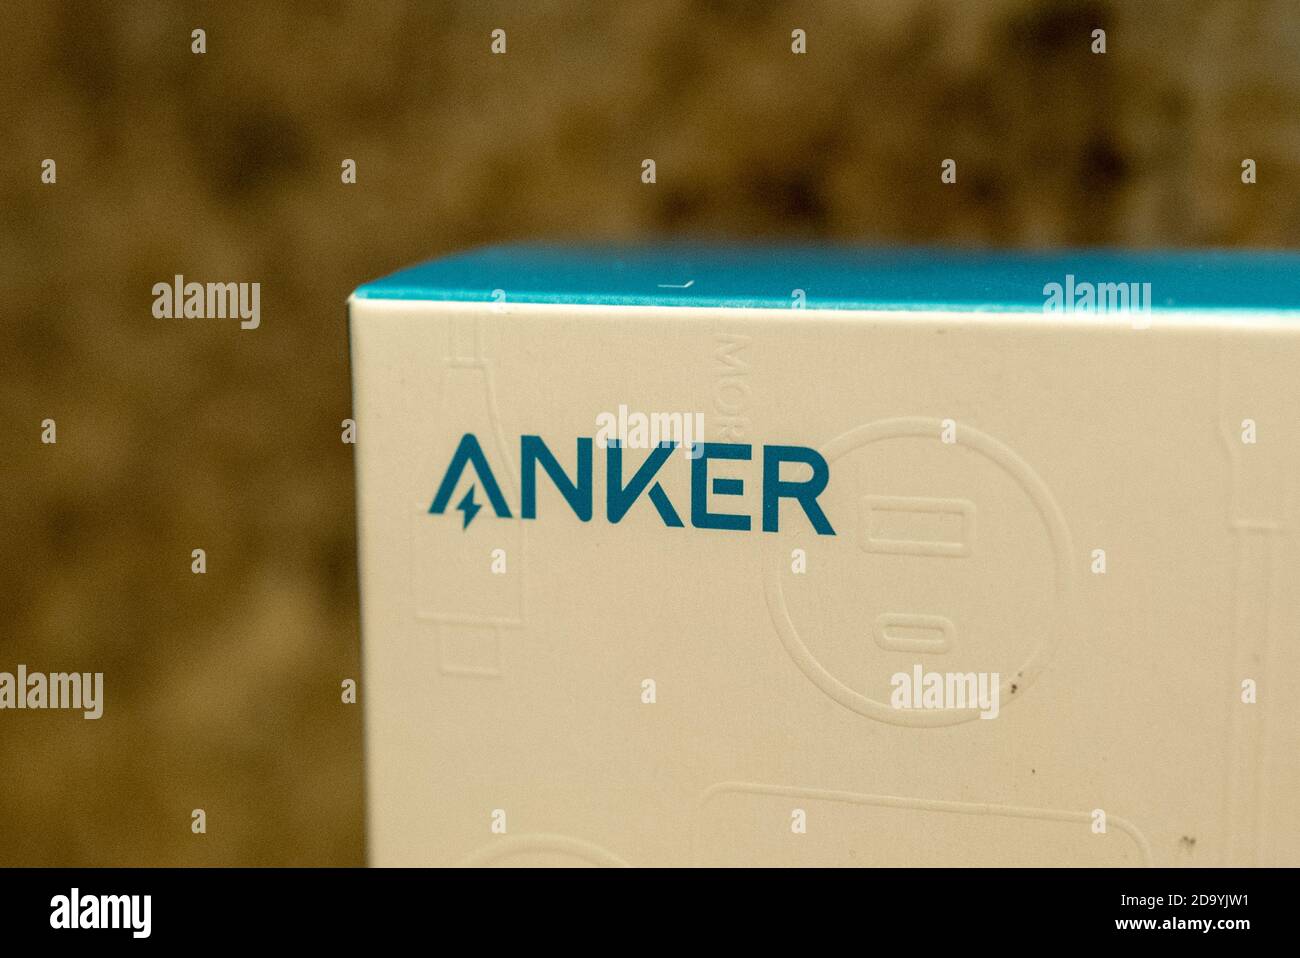 selvmord Lagring krøllet SAN FRANCISCO, CALIFORNIA: The logo of Chinese electronics manufacturer  Anker, October 19, 2020. Anker is a Chinese electronics brand owned by Anker  Innovations based in Shenzhen, Guangdong. The brand is known for